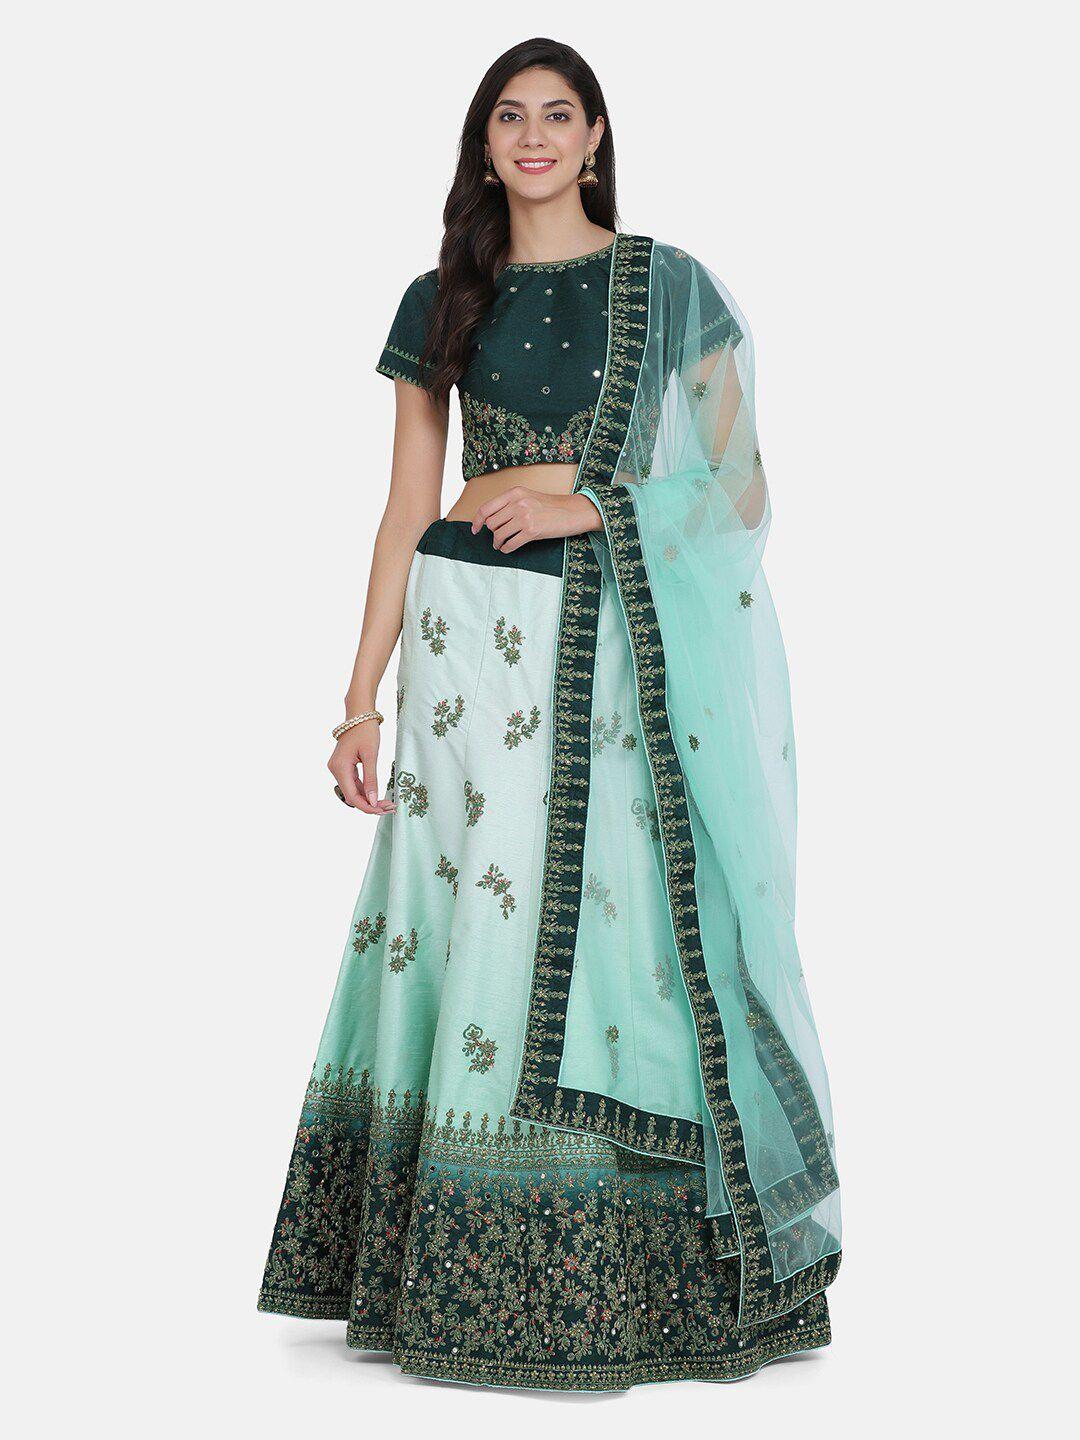 hritika floral embroidered semi-stitched lehenga & unstitched blouse with dupatta